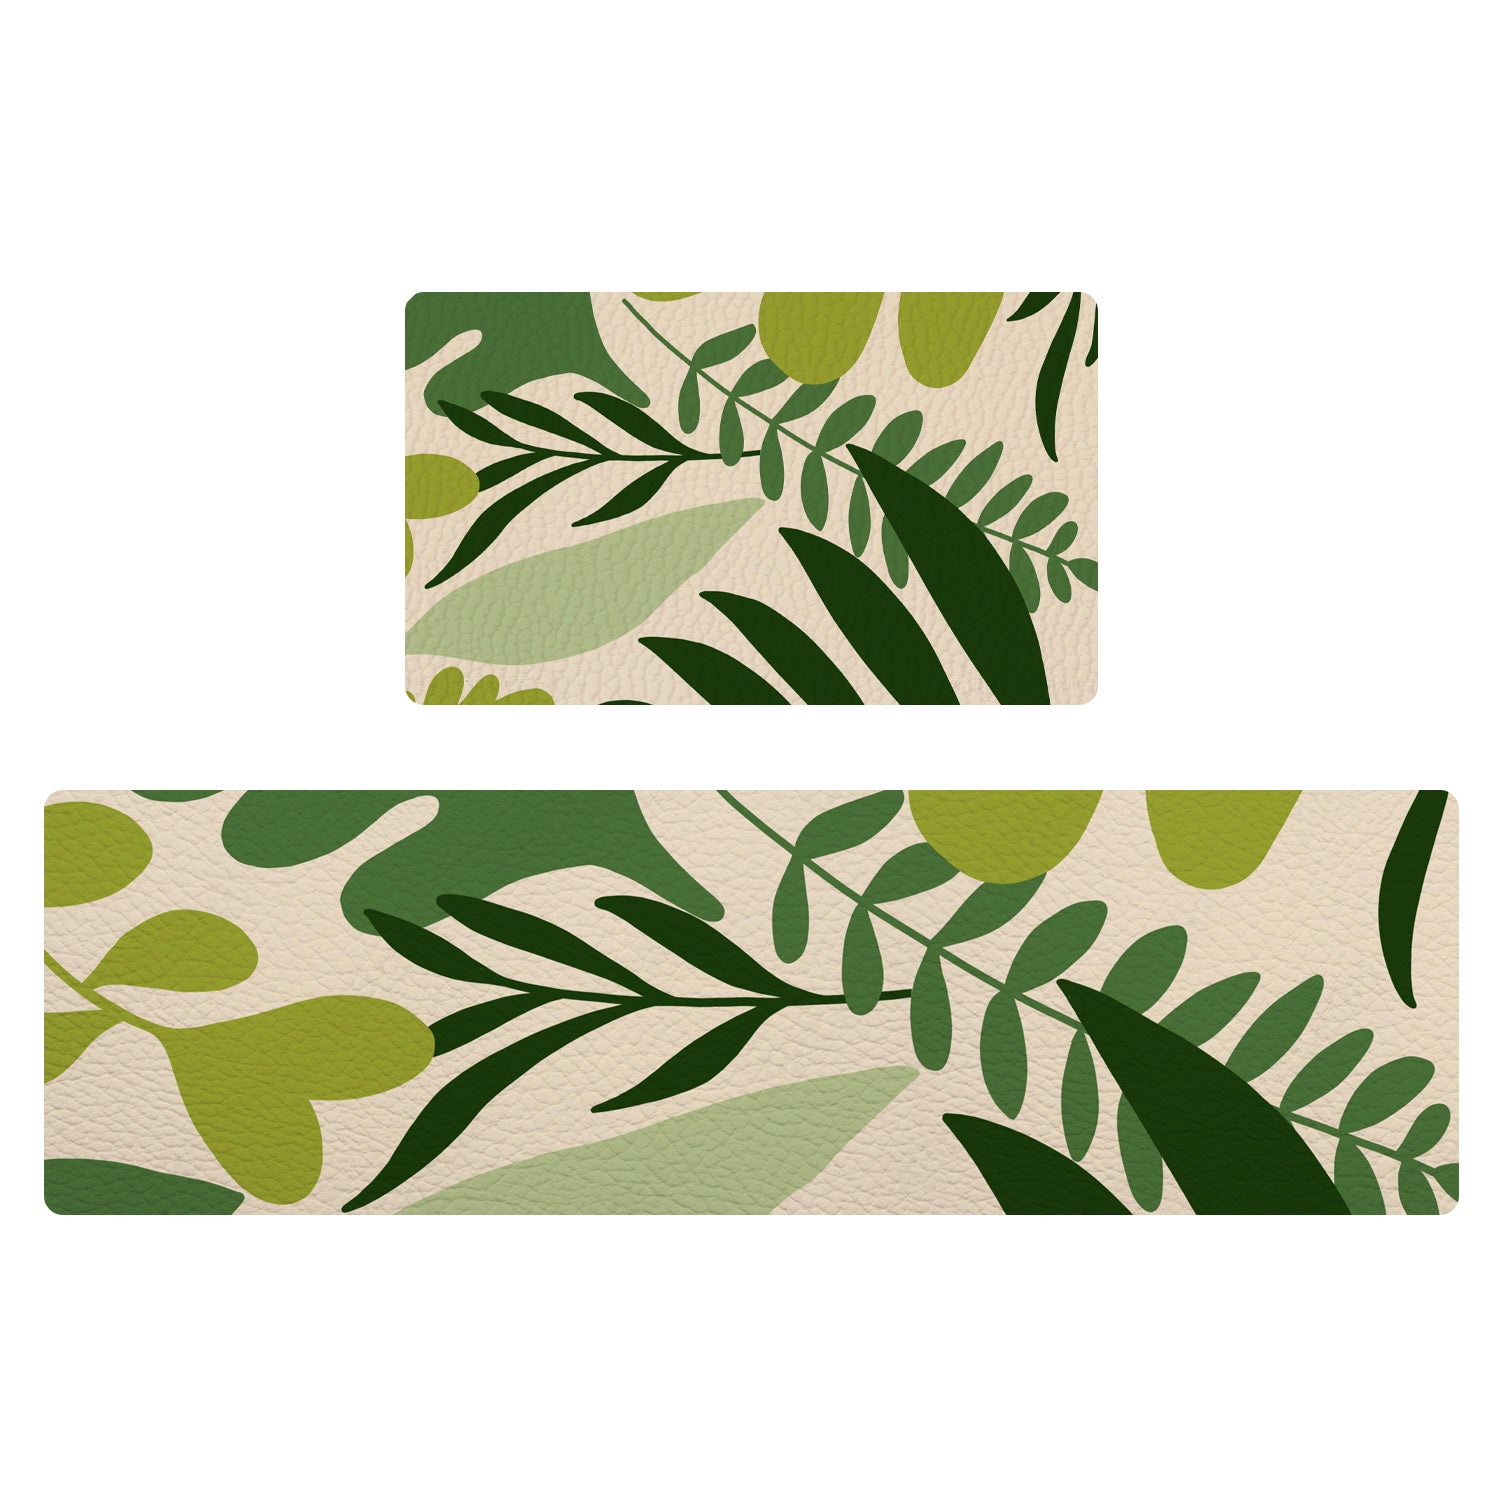 Feblilac Green Tropical Plant Leaves PVC Leather Kitchen Mat @Frank's design